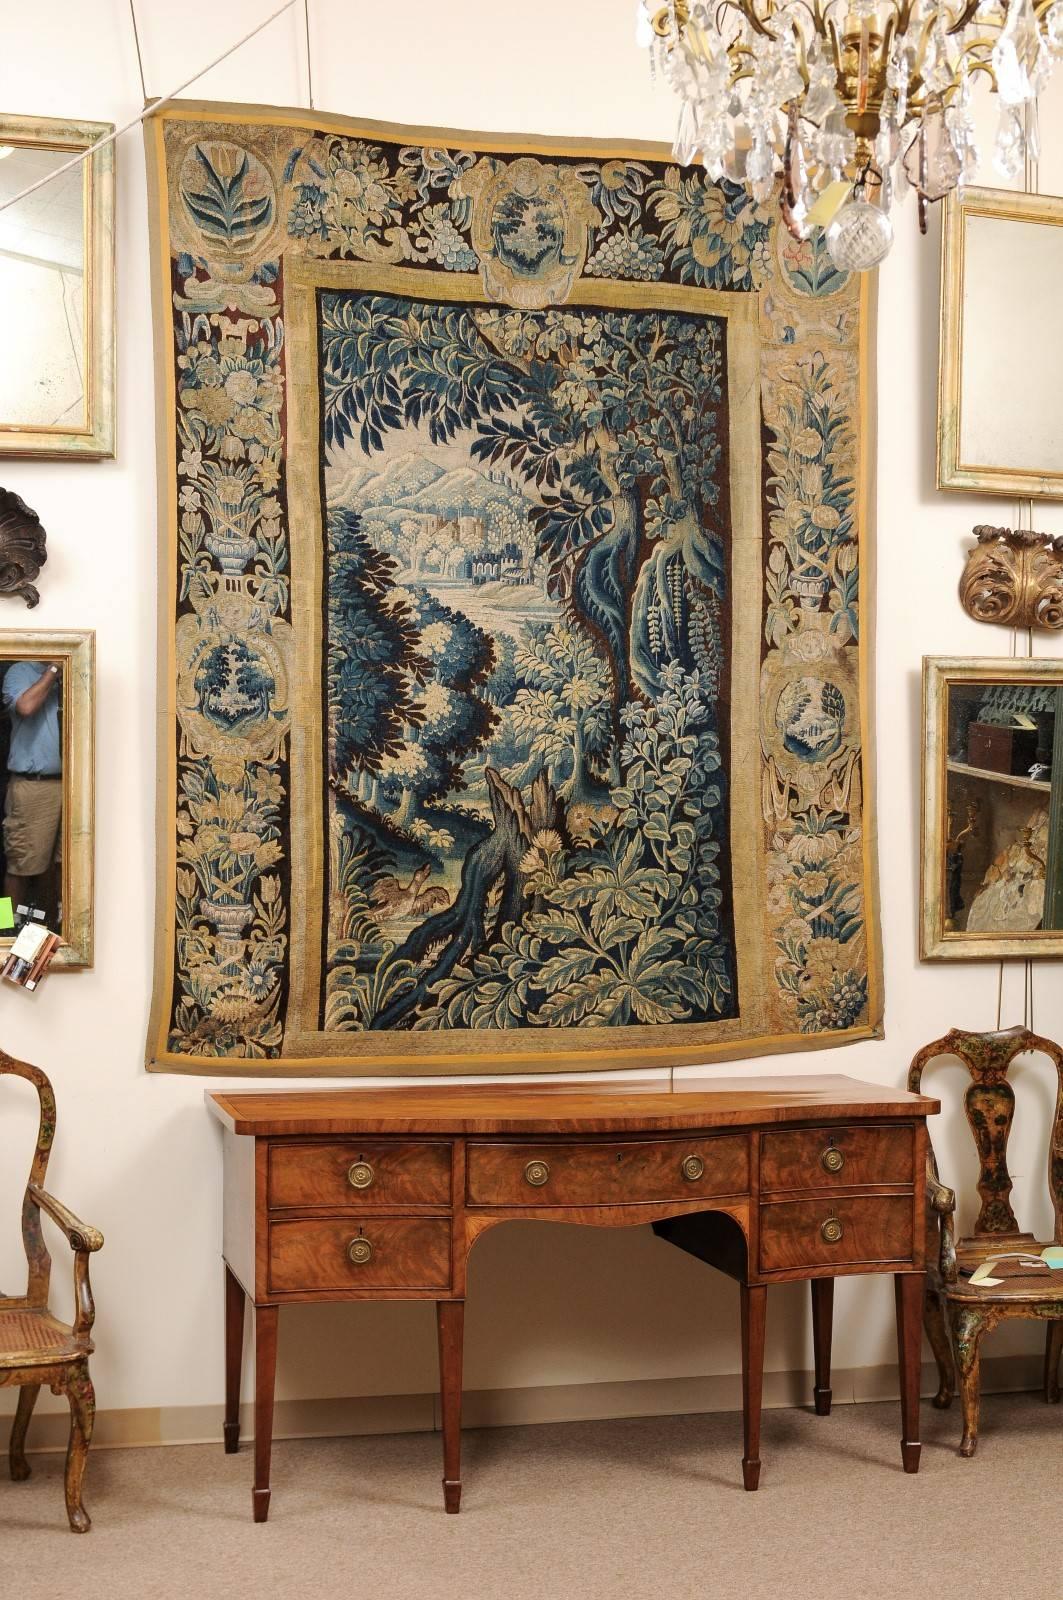 European French Aubusson Tapestry, 18th Century